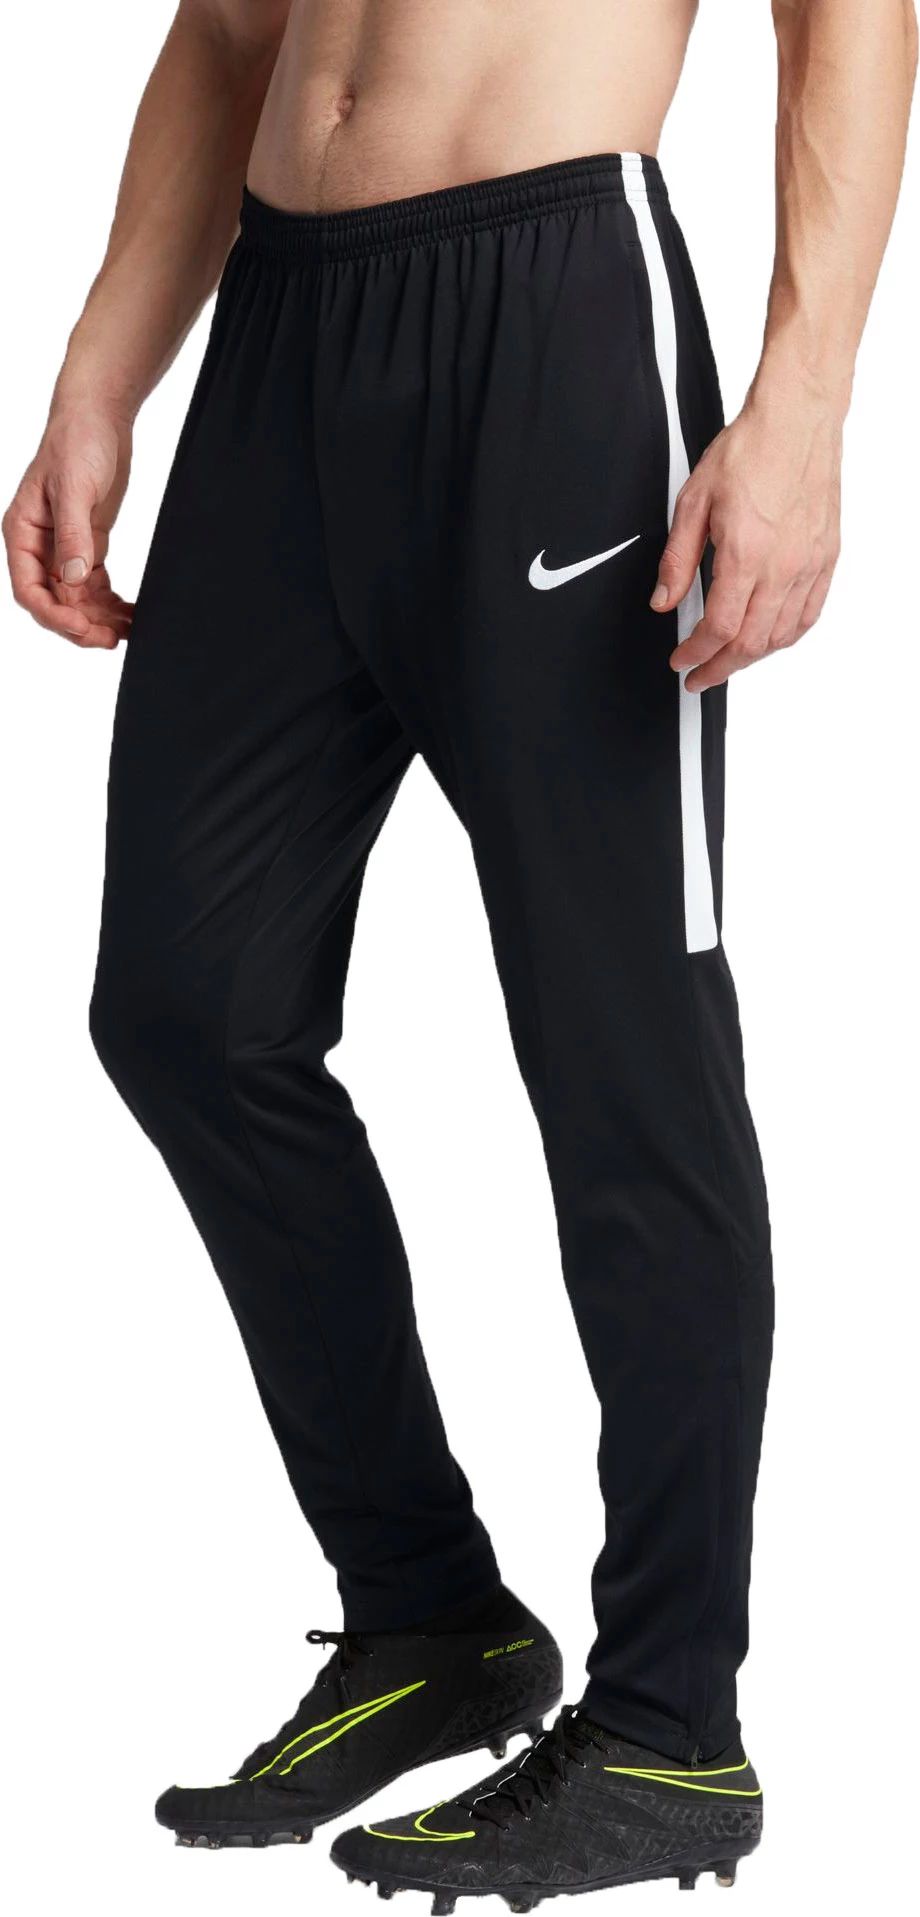 Nike Men's Dry Academy Soccer Pants, Size: Small, Black | Dick's Sporting Goods